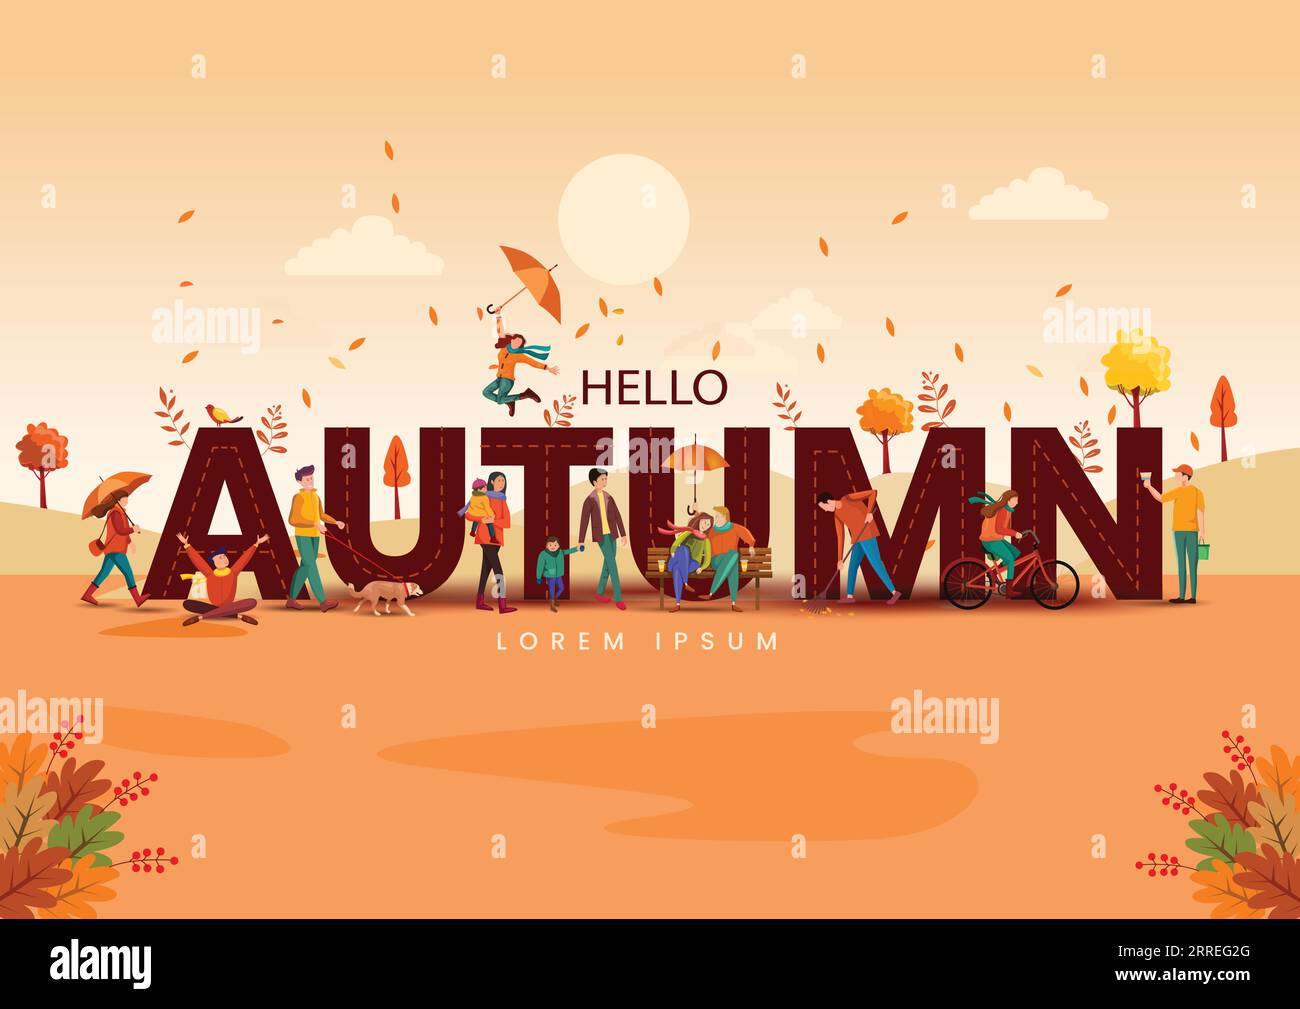 Vector illustration of horizontal banner of hello autumn landscape cartoon characters and maple trees fallen with dark brown background. Stock Vector